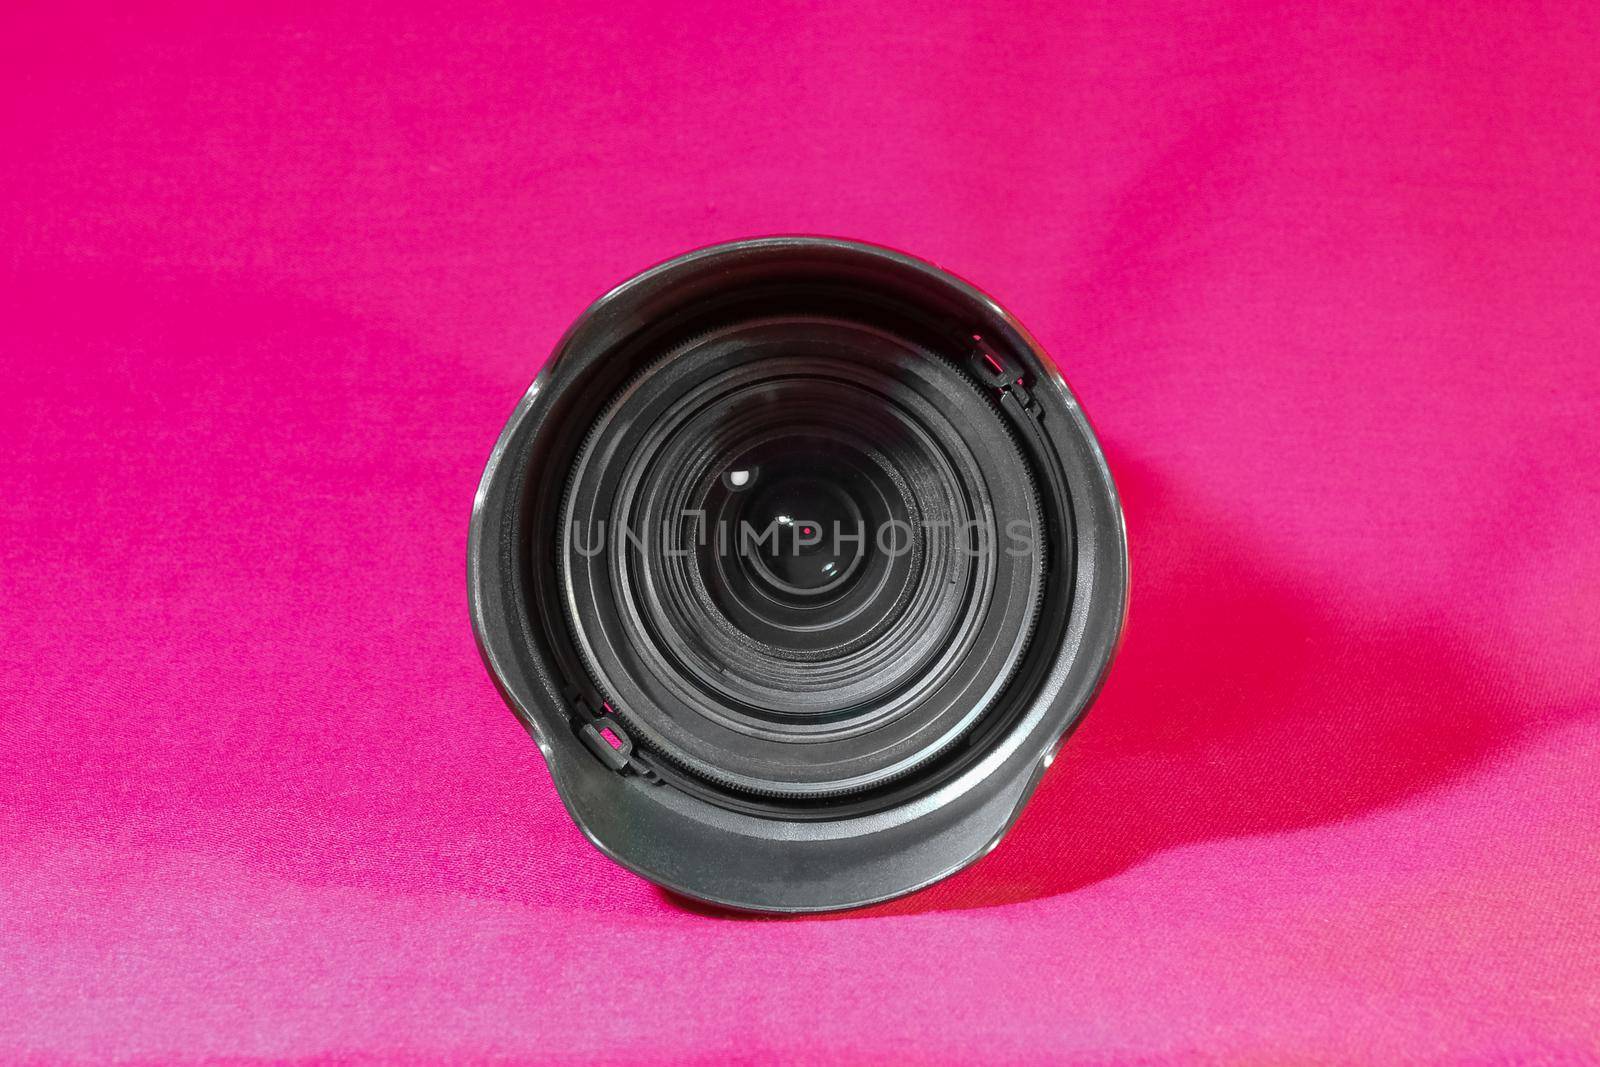 camera lens on a black and white background. high-quality photos